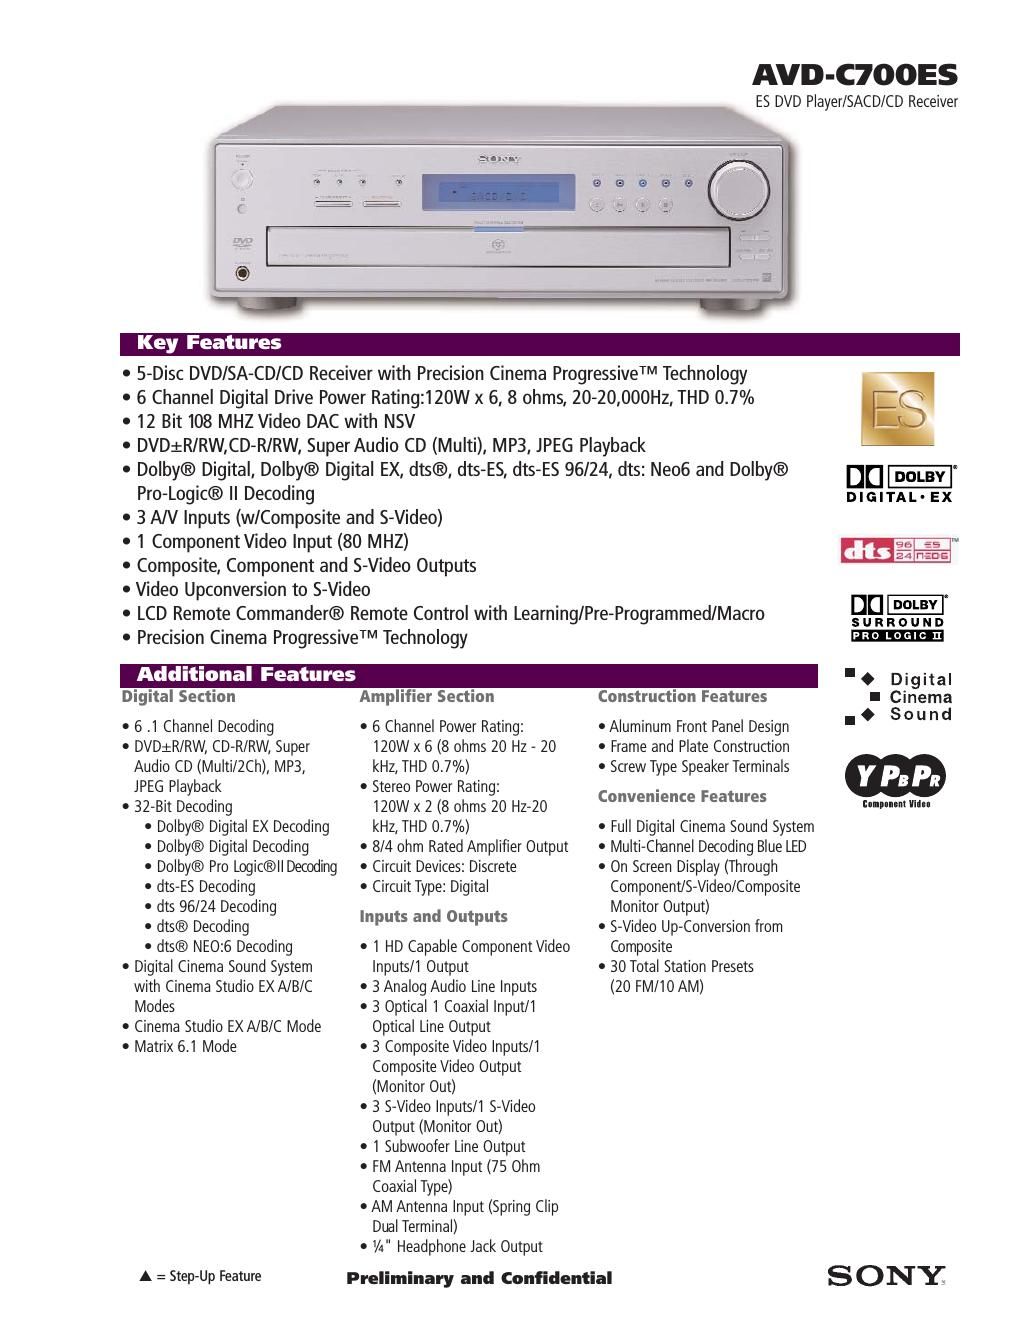 sony avd c 700 es owners manual